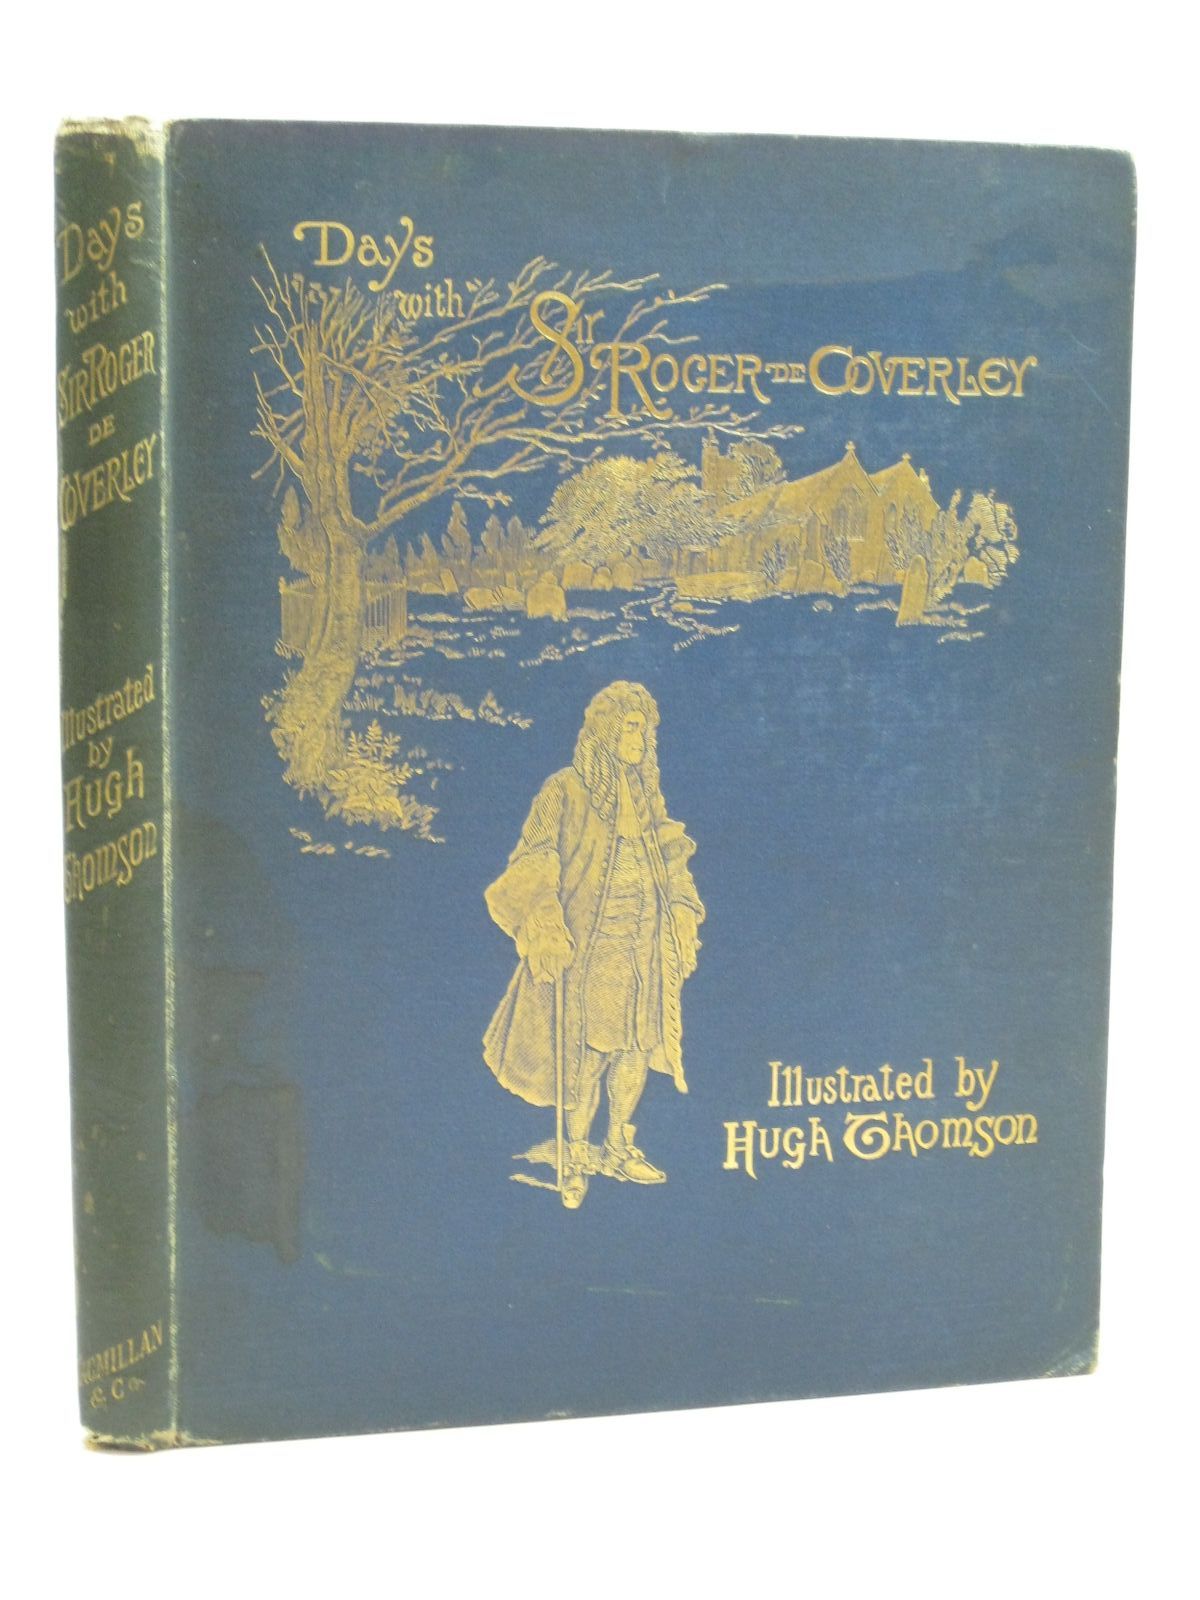 ILLUSTRATED BY THOMSON, HUGH - Days with Sir Roger de Coverley